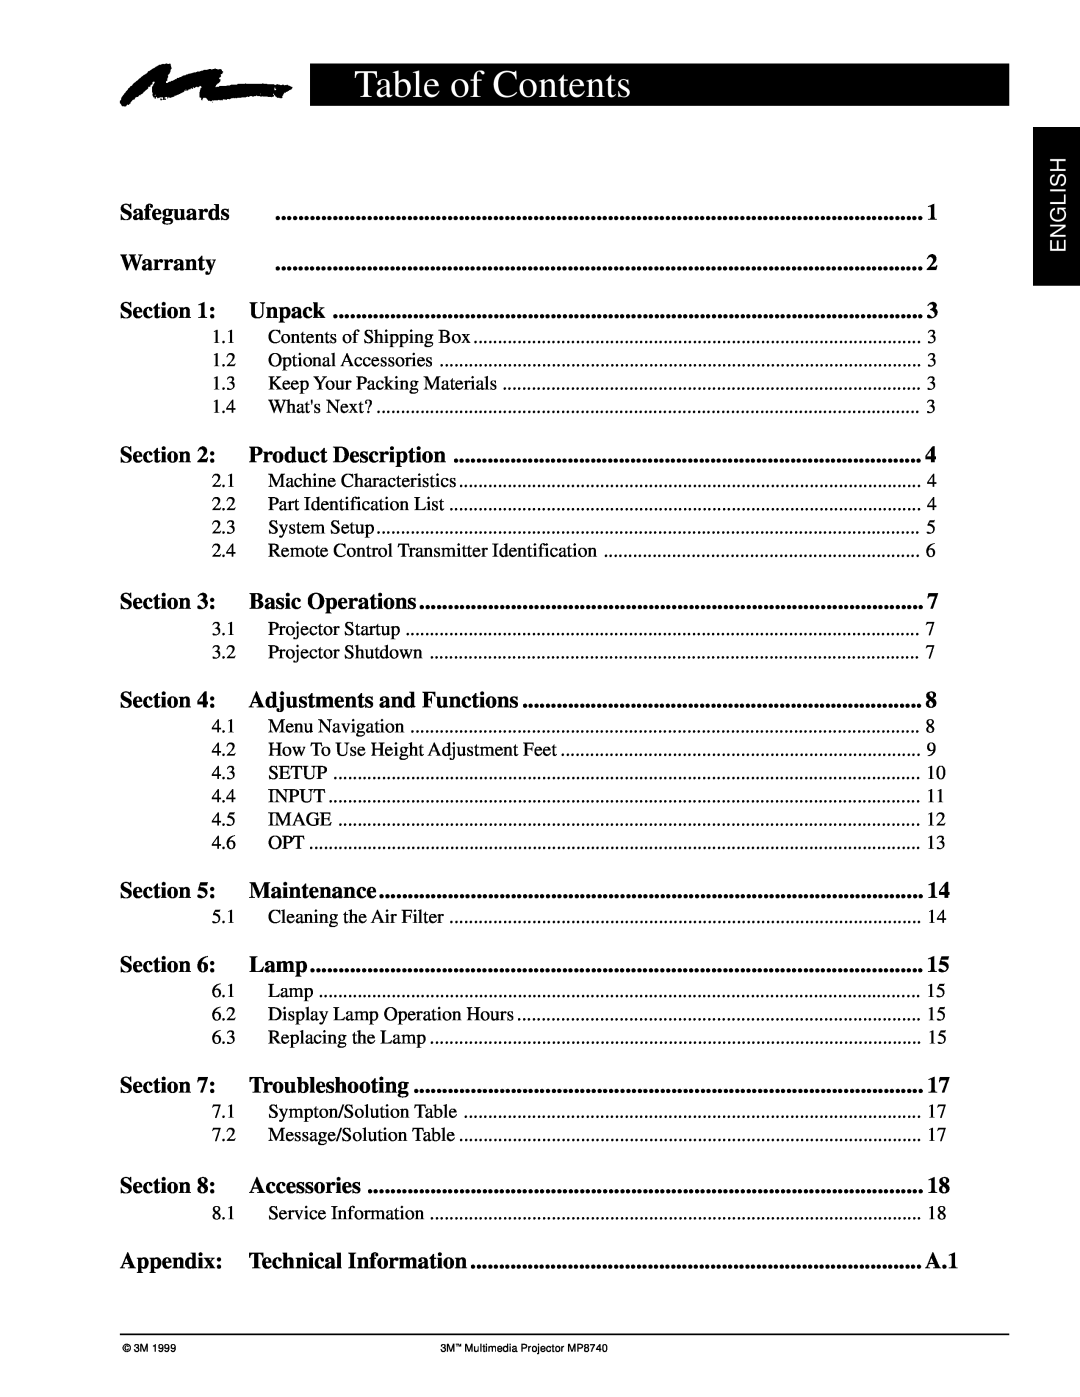 3M MP8740 manual Table of Contents, English 